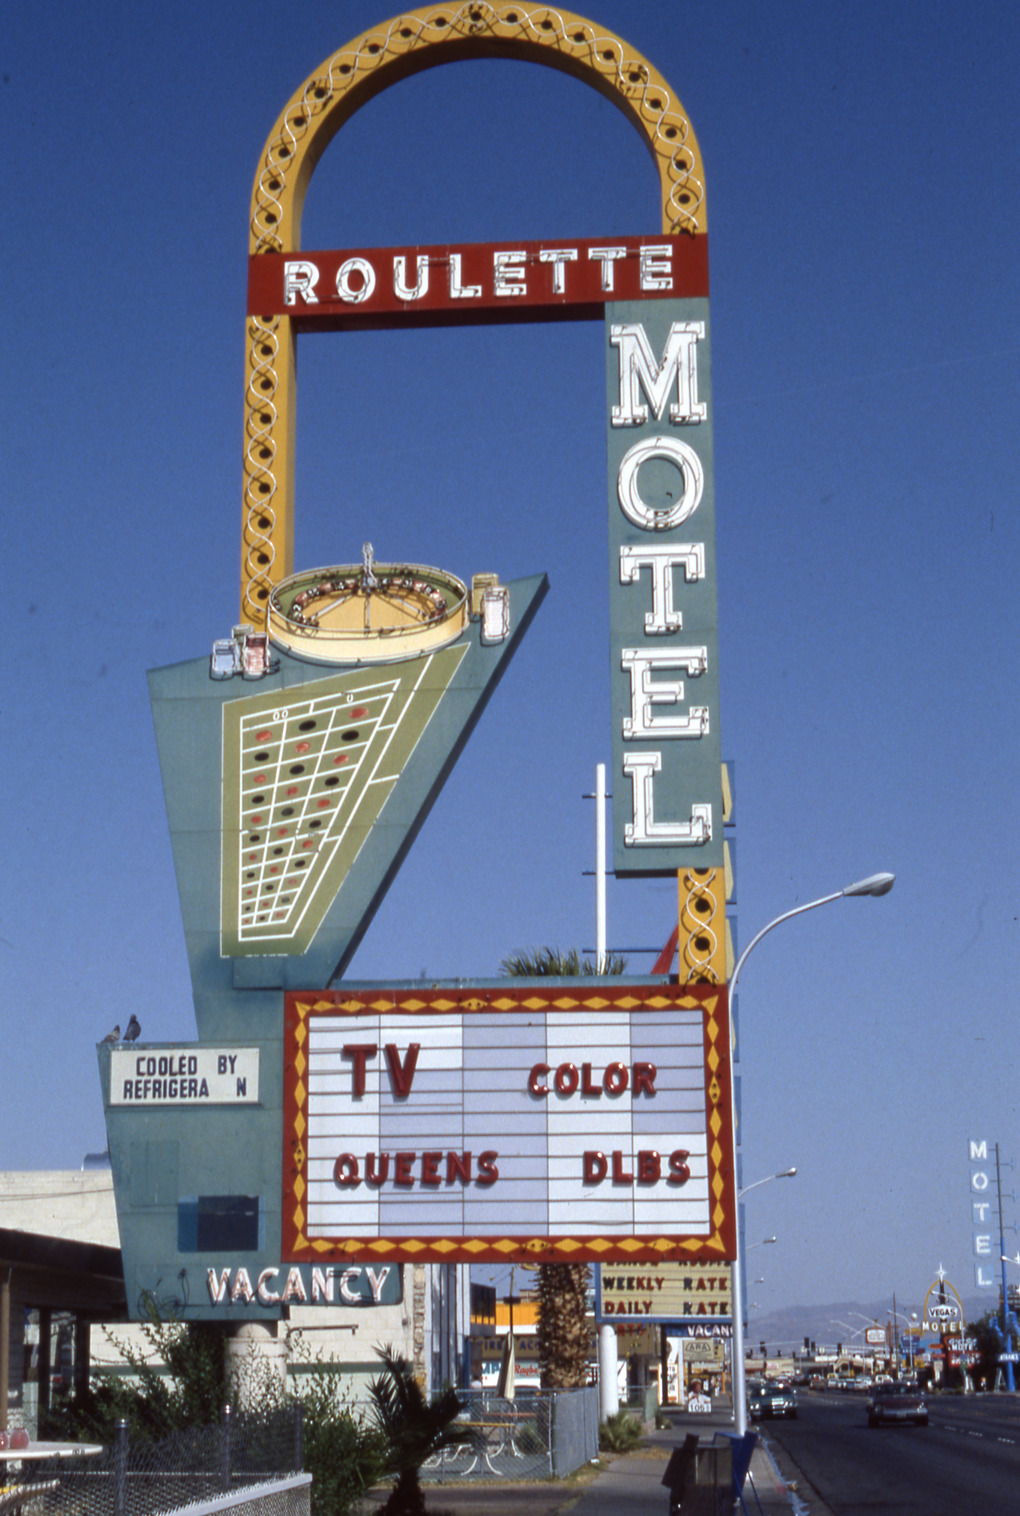  Roulette Motel flag mounted pylon and marquee signs, Las Vegas, Nevada: photographic print